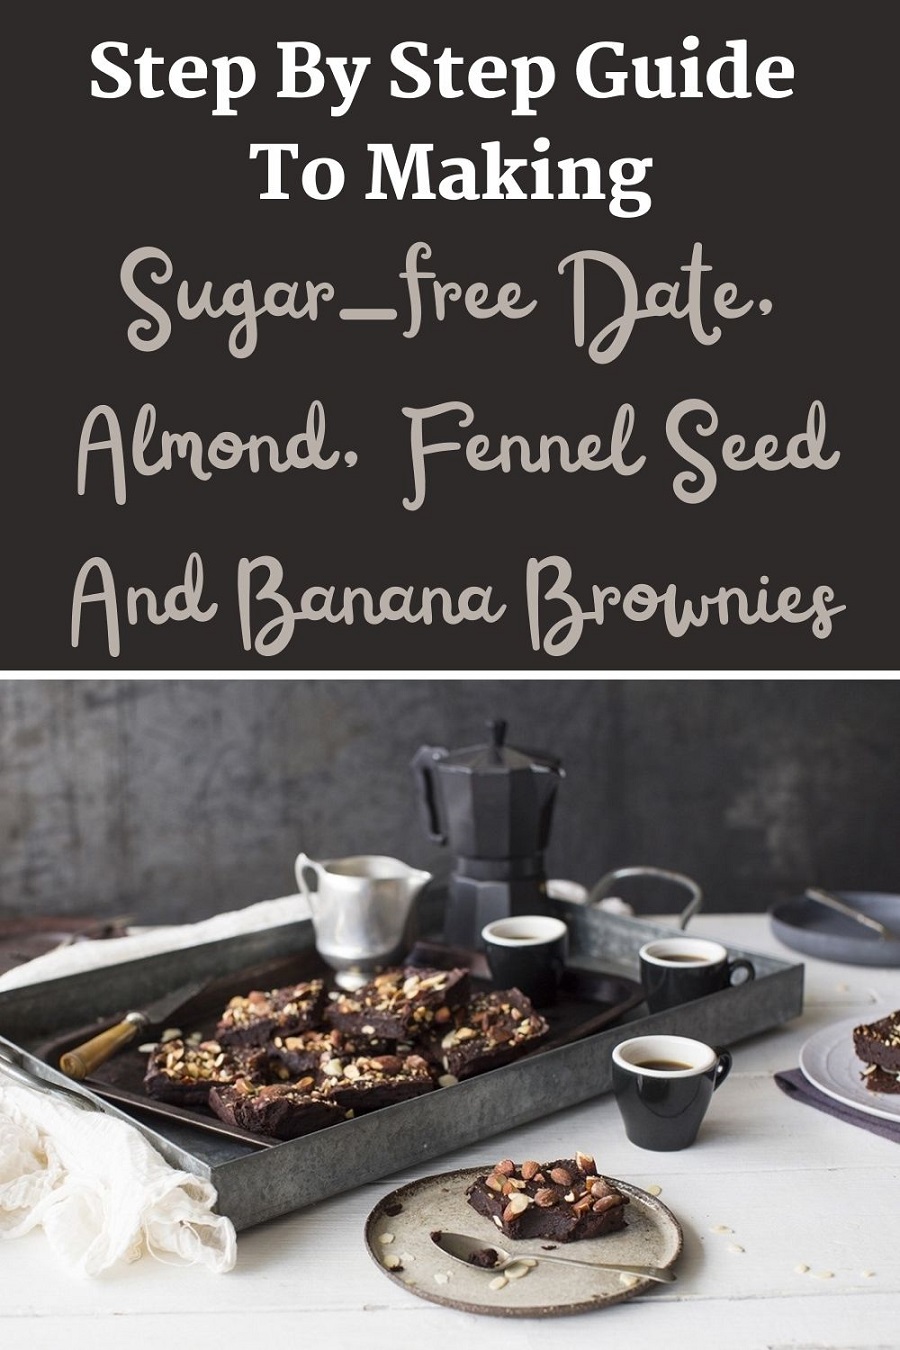 Sugar-free Date, Almond, Fennel Seed And Banana Brownies: